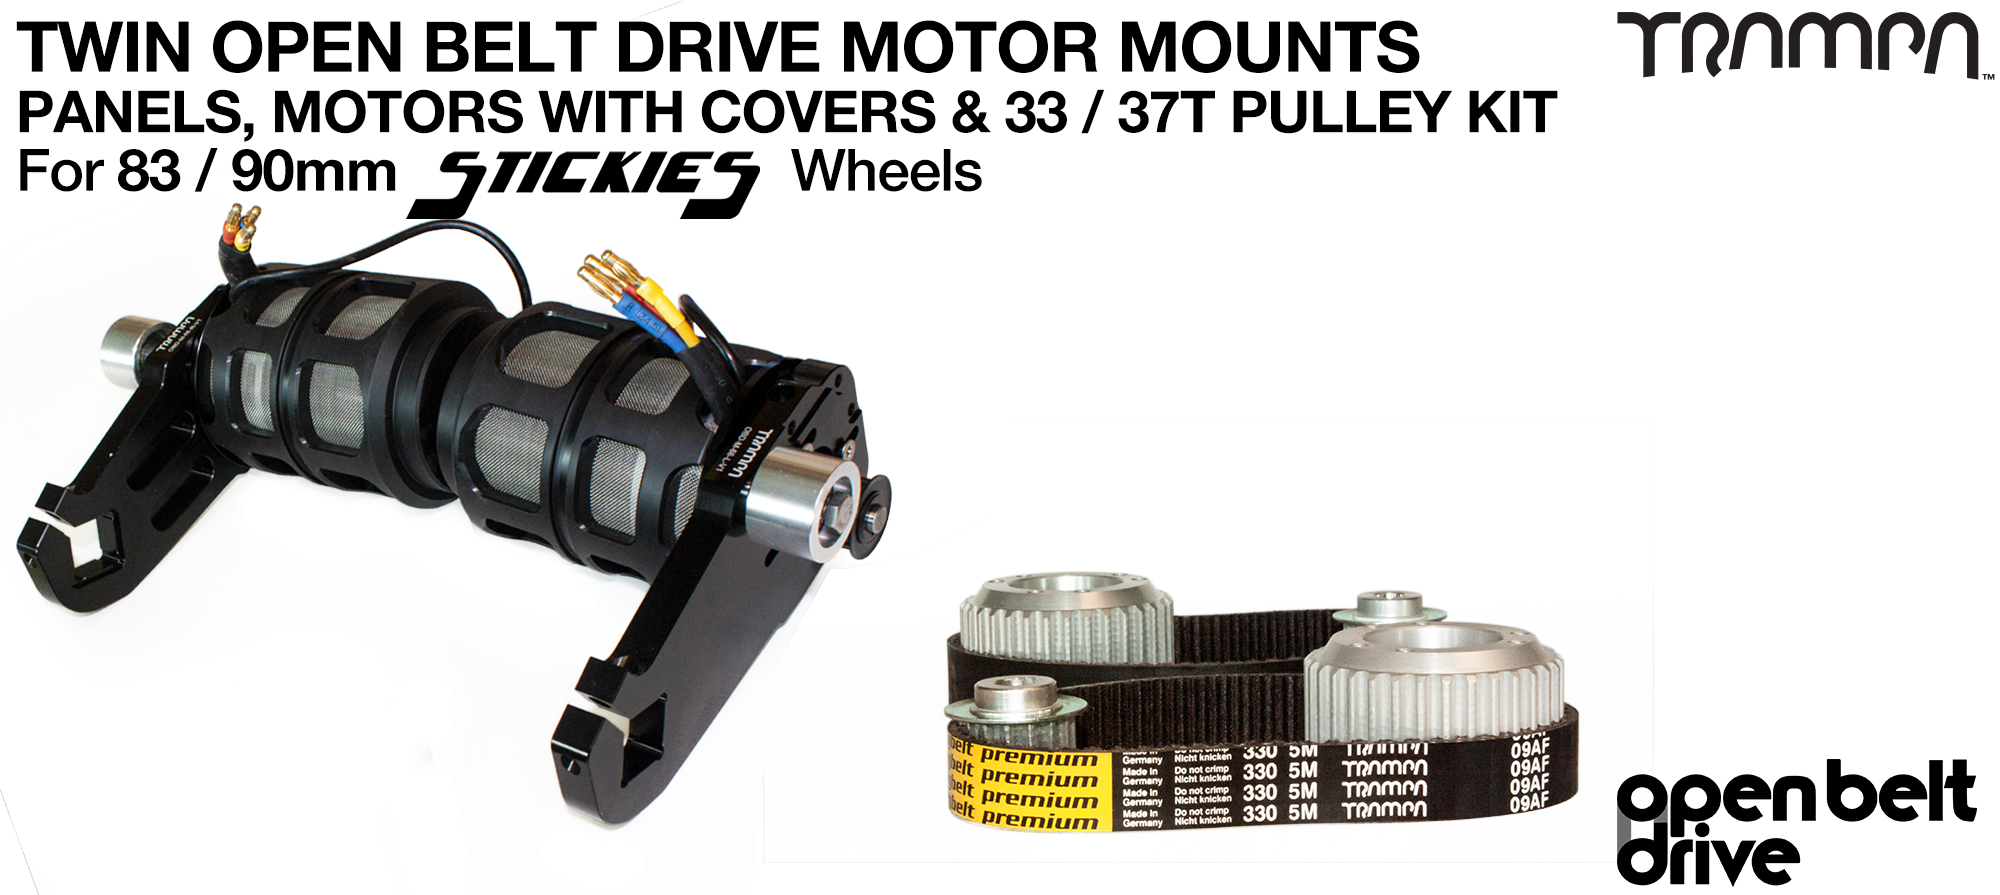 66T OBD Motor Mount with 33 / 37T Pulley kit, Motor & Filters  - TWIN